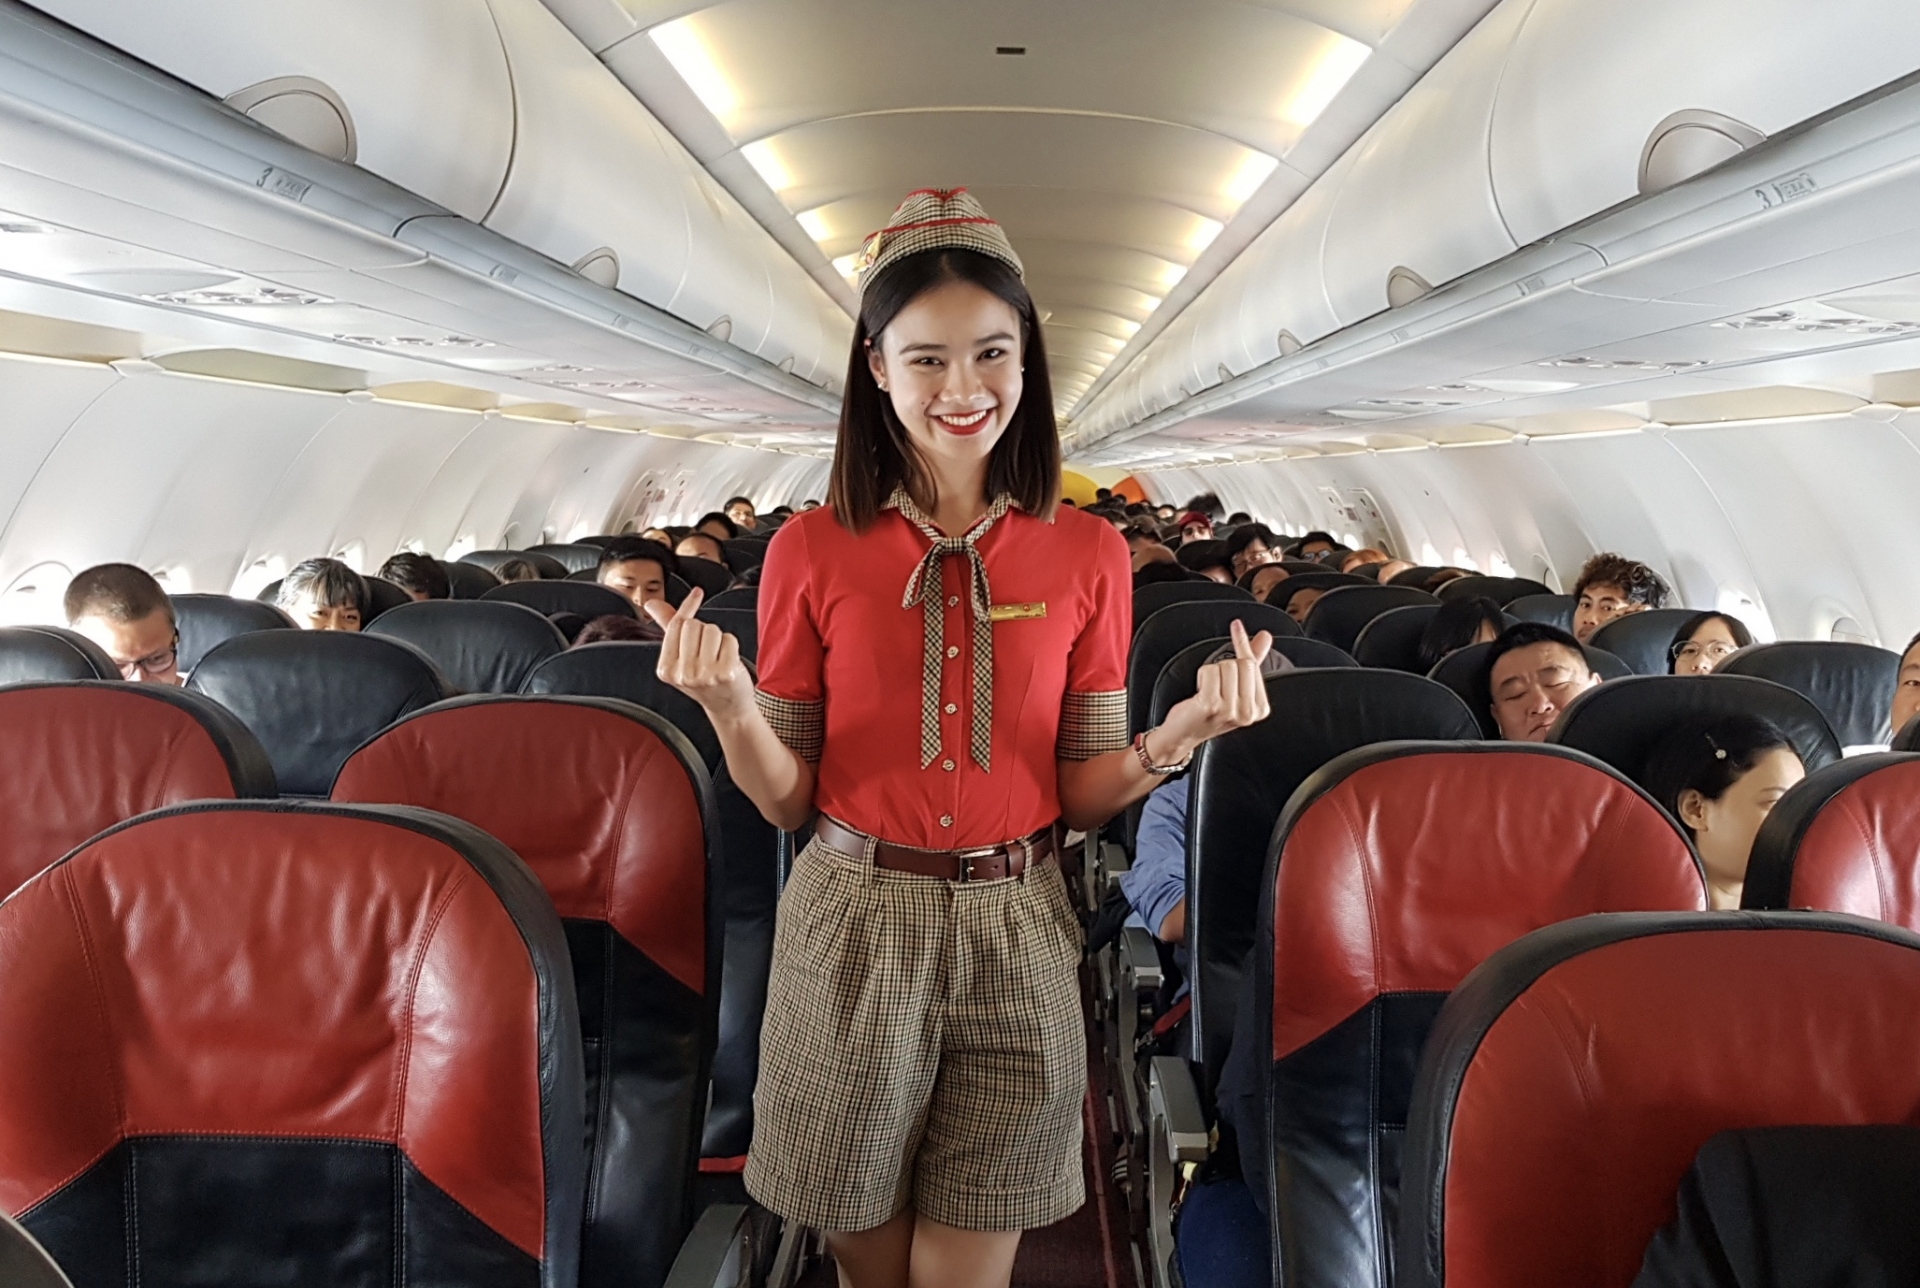 Thai Vietjet offers super-saver fares from just $1.50 for all 13 routes in Thailand